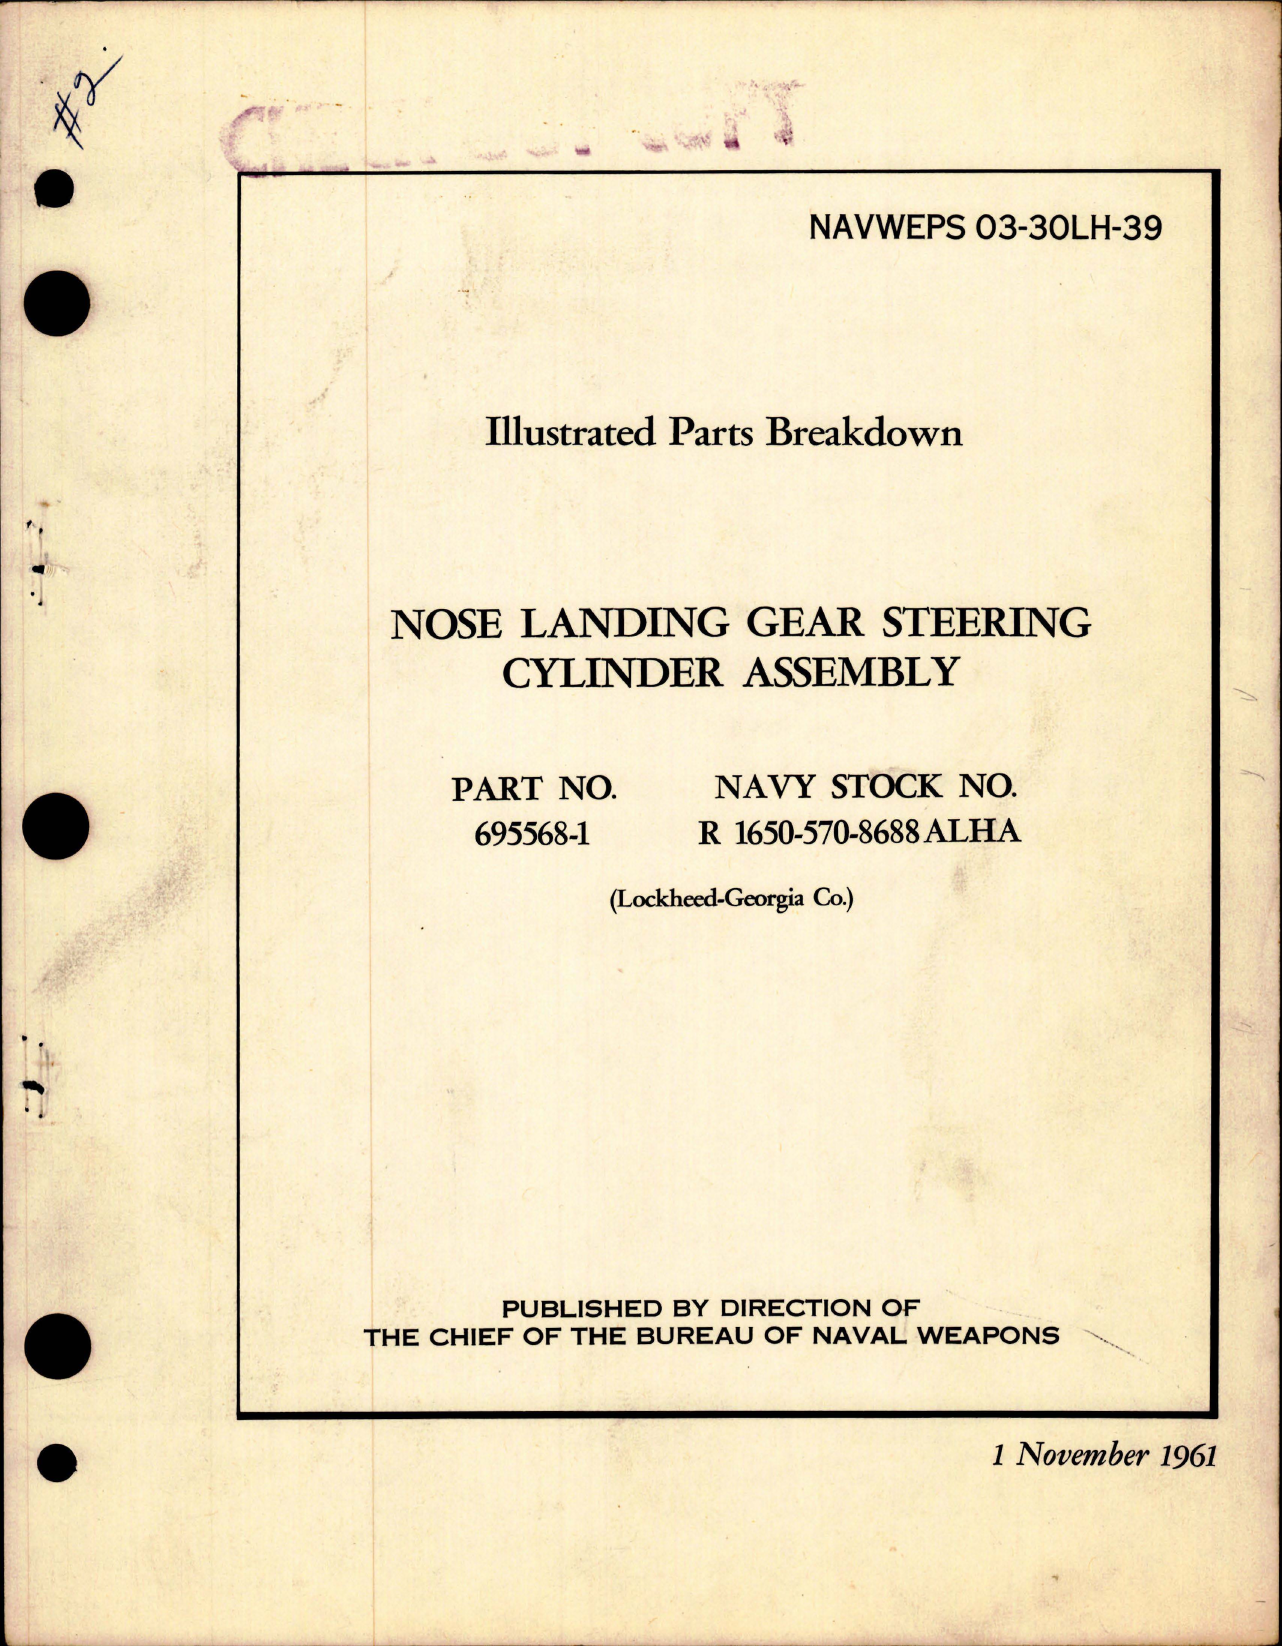 Sample page 1 from AirCorps Library document: Illustrated Parts Breakdown for Nose Landing Gear Steering Cylinder Assembly - PART 695568-1